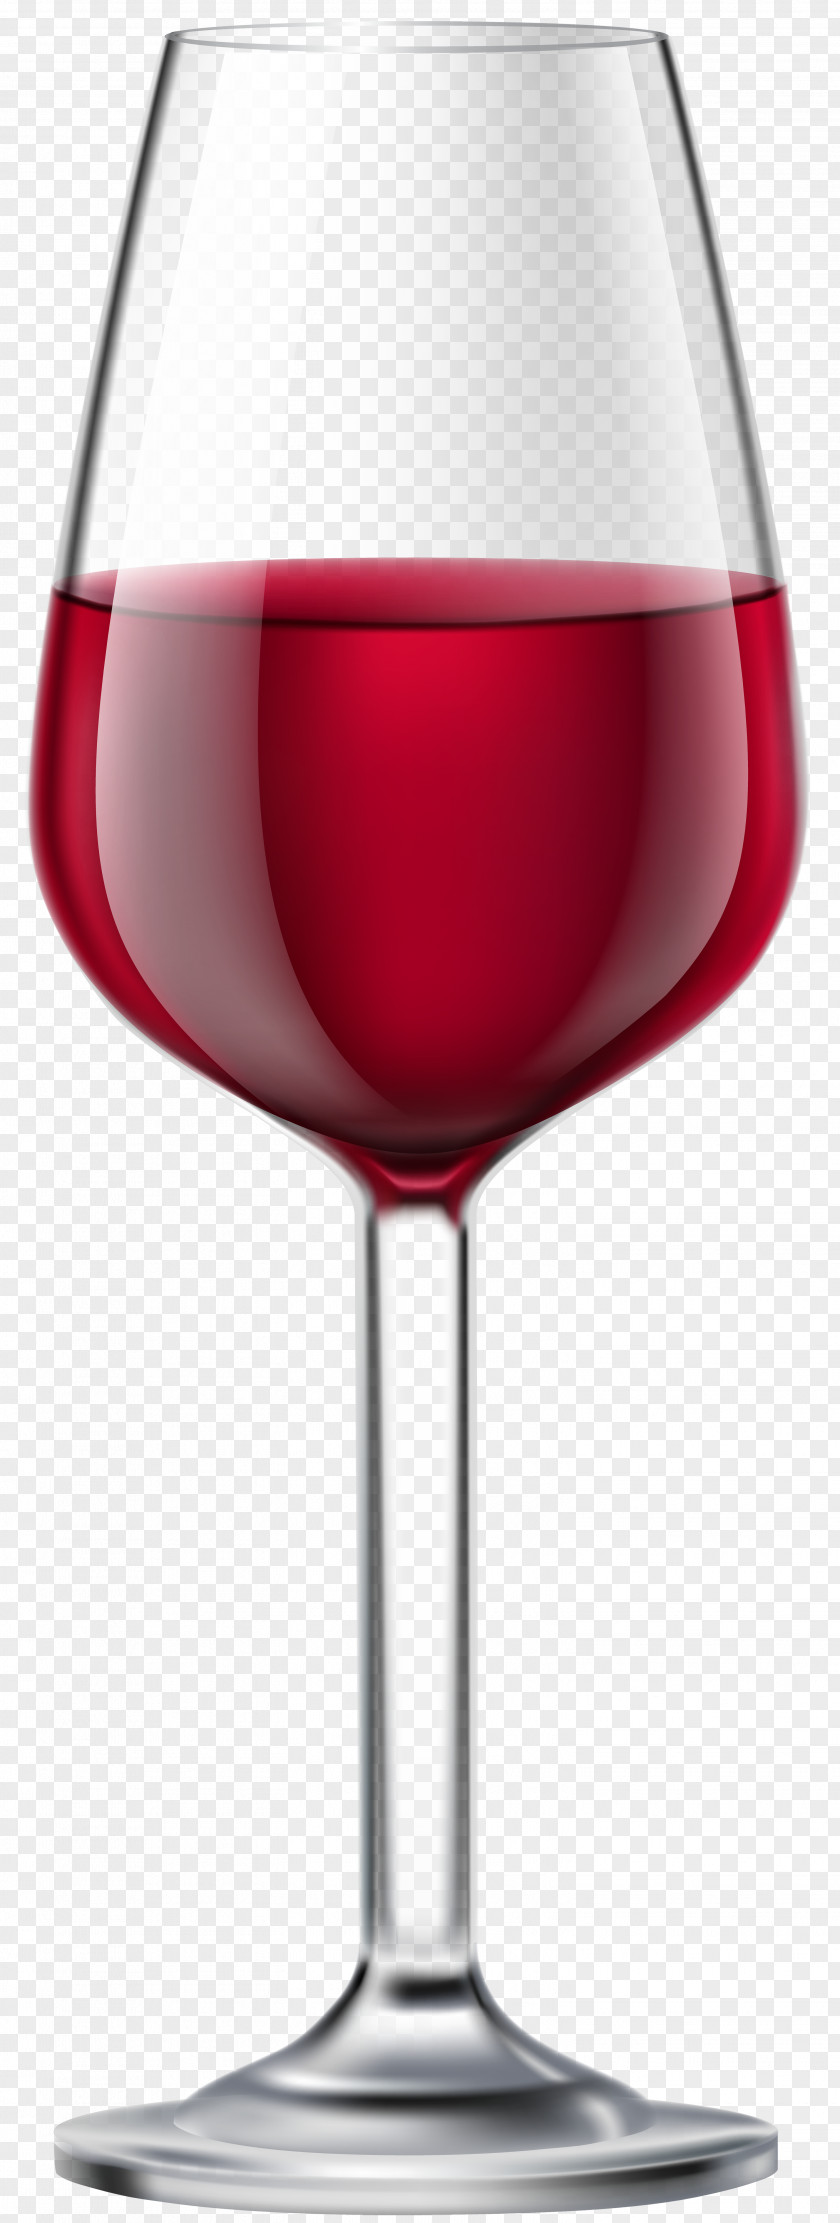 Glass Of Red Wine Transparent Clip Art Image Cocktail PNG